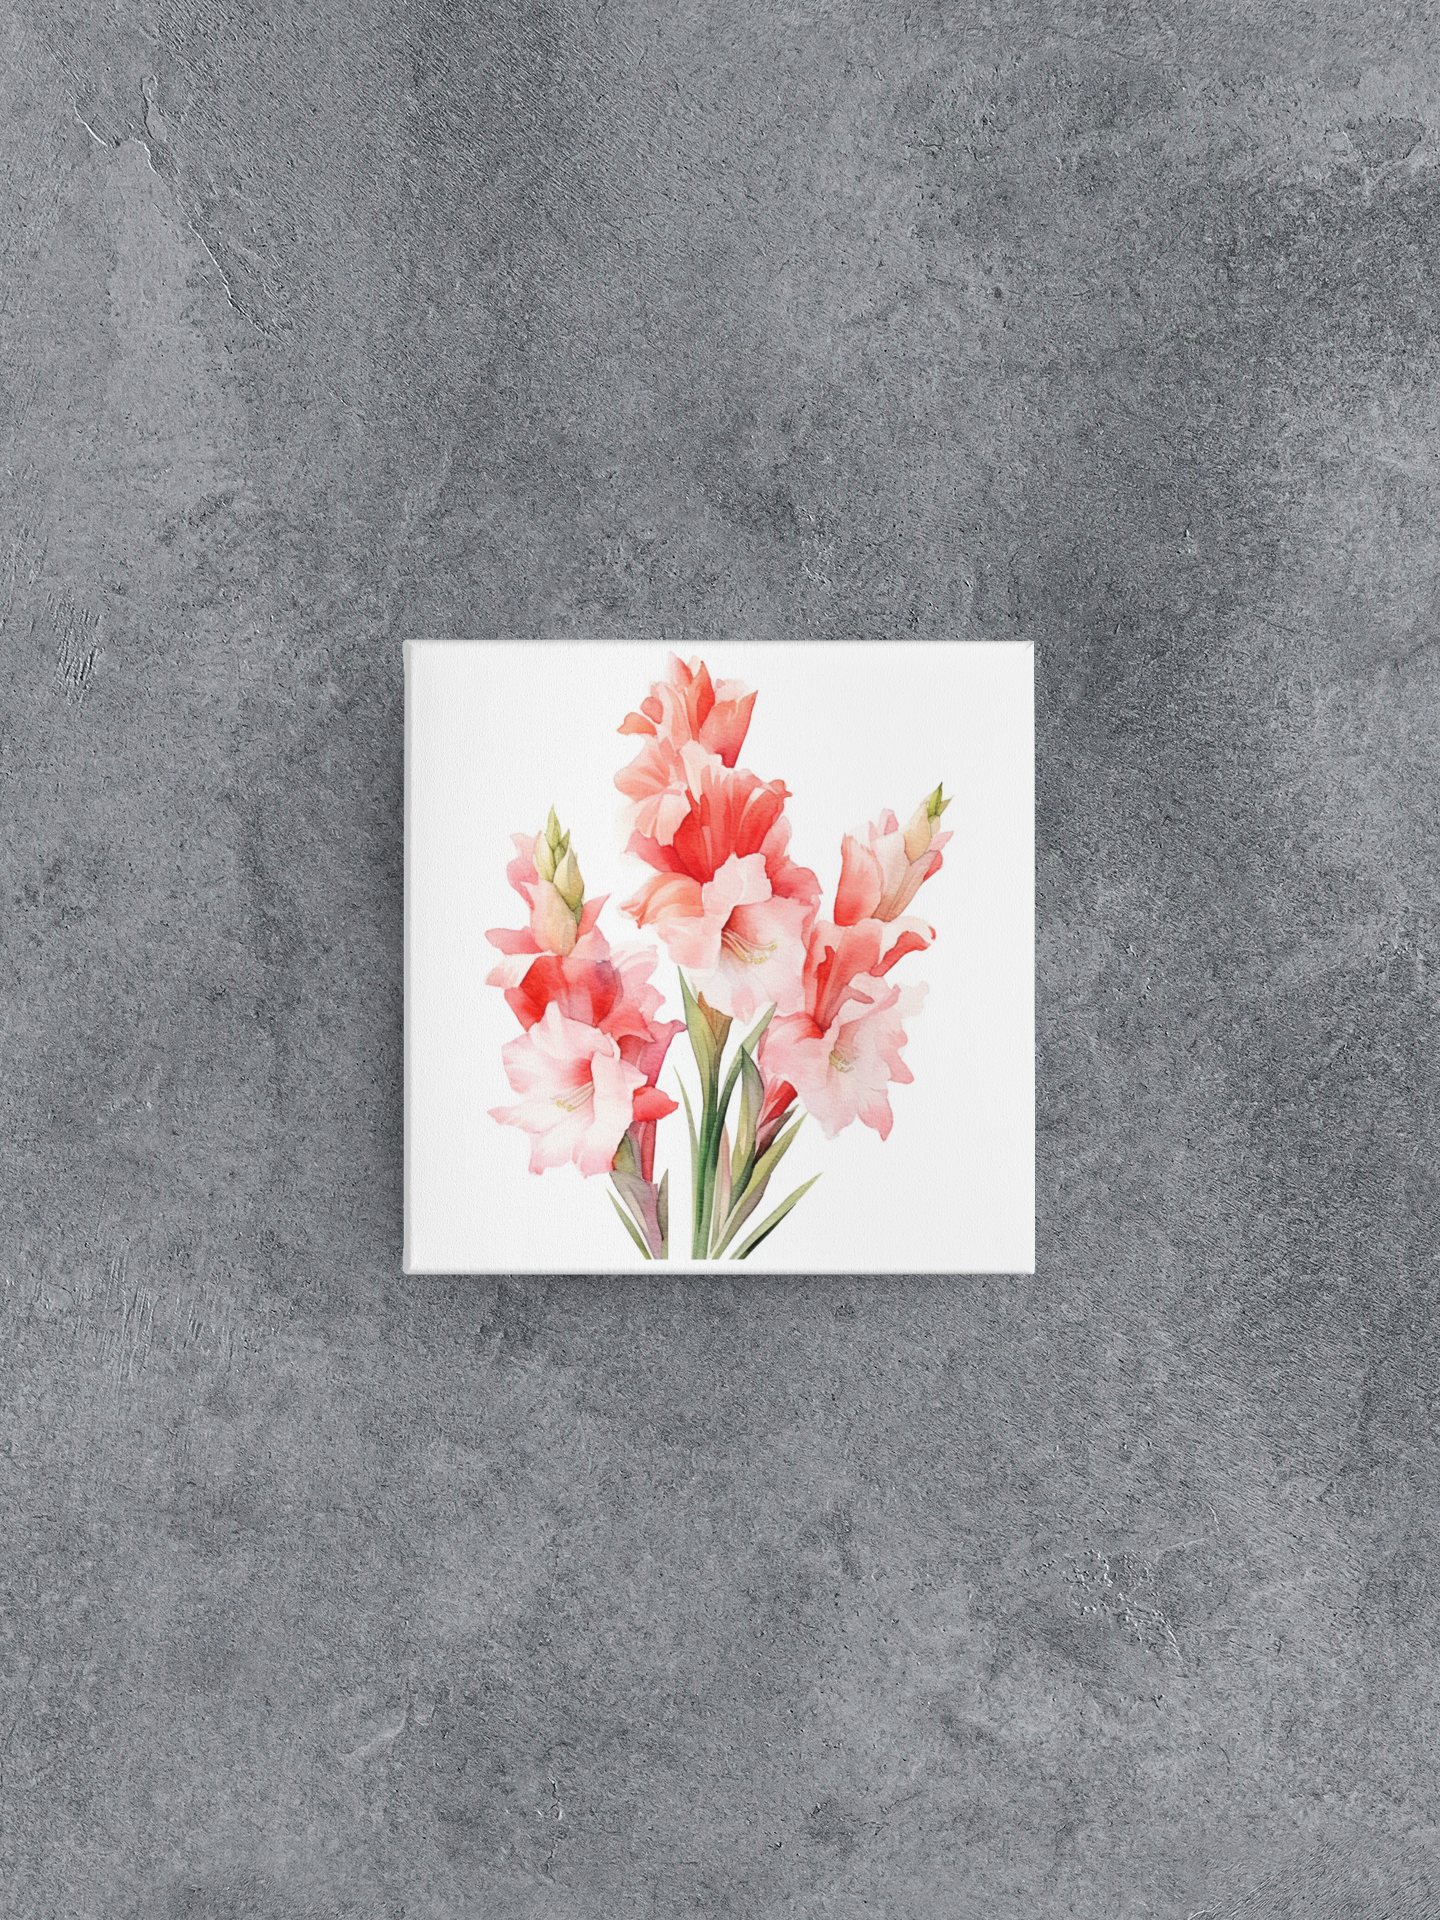 Gladiolus Canvas Wall Art, Watercolor Gladiolus Flowers Painting, Nature Canvas Art, Mother's Day Gift